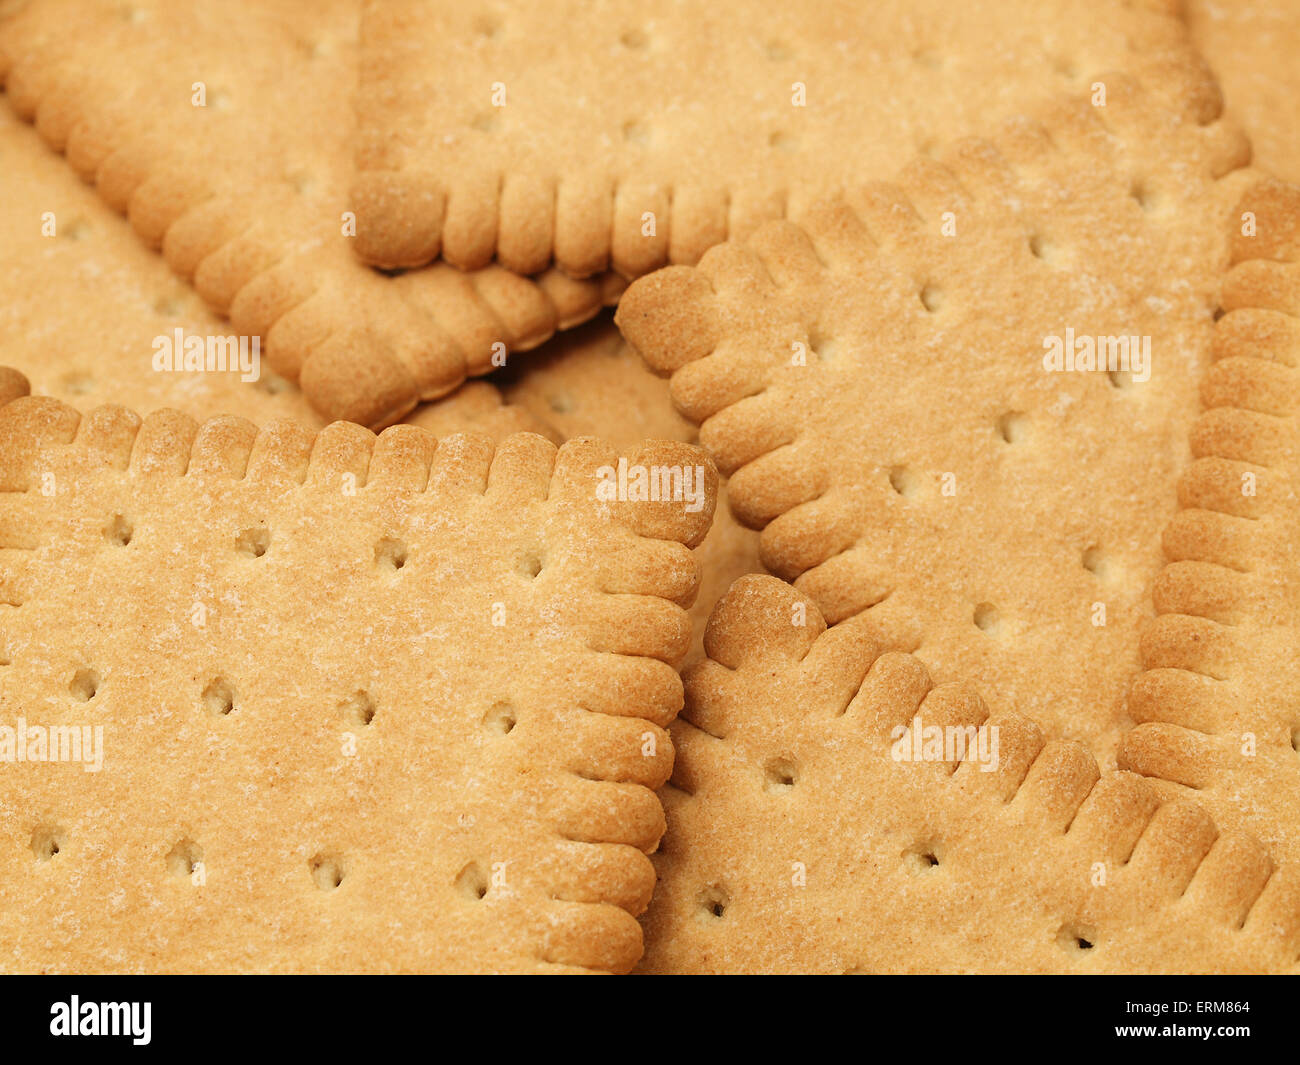 Tasty biscuits background Stock Photo